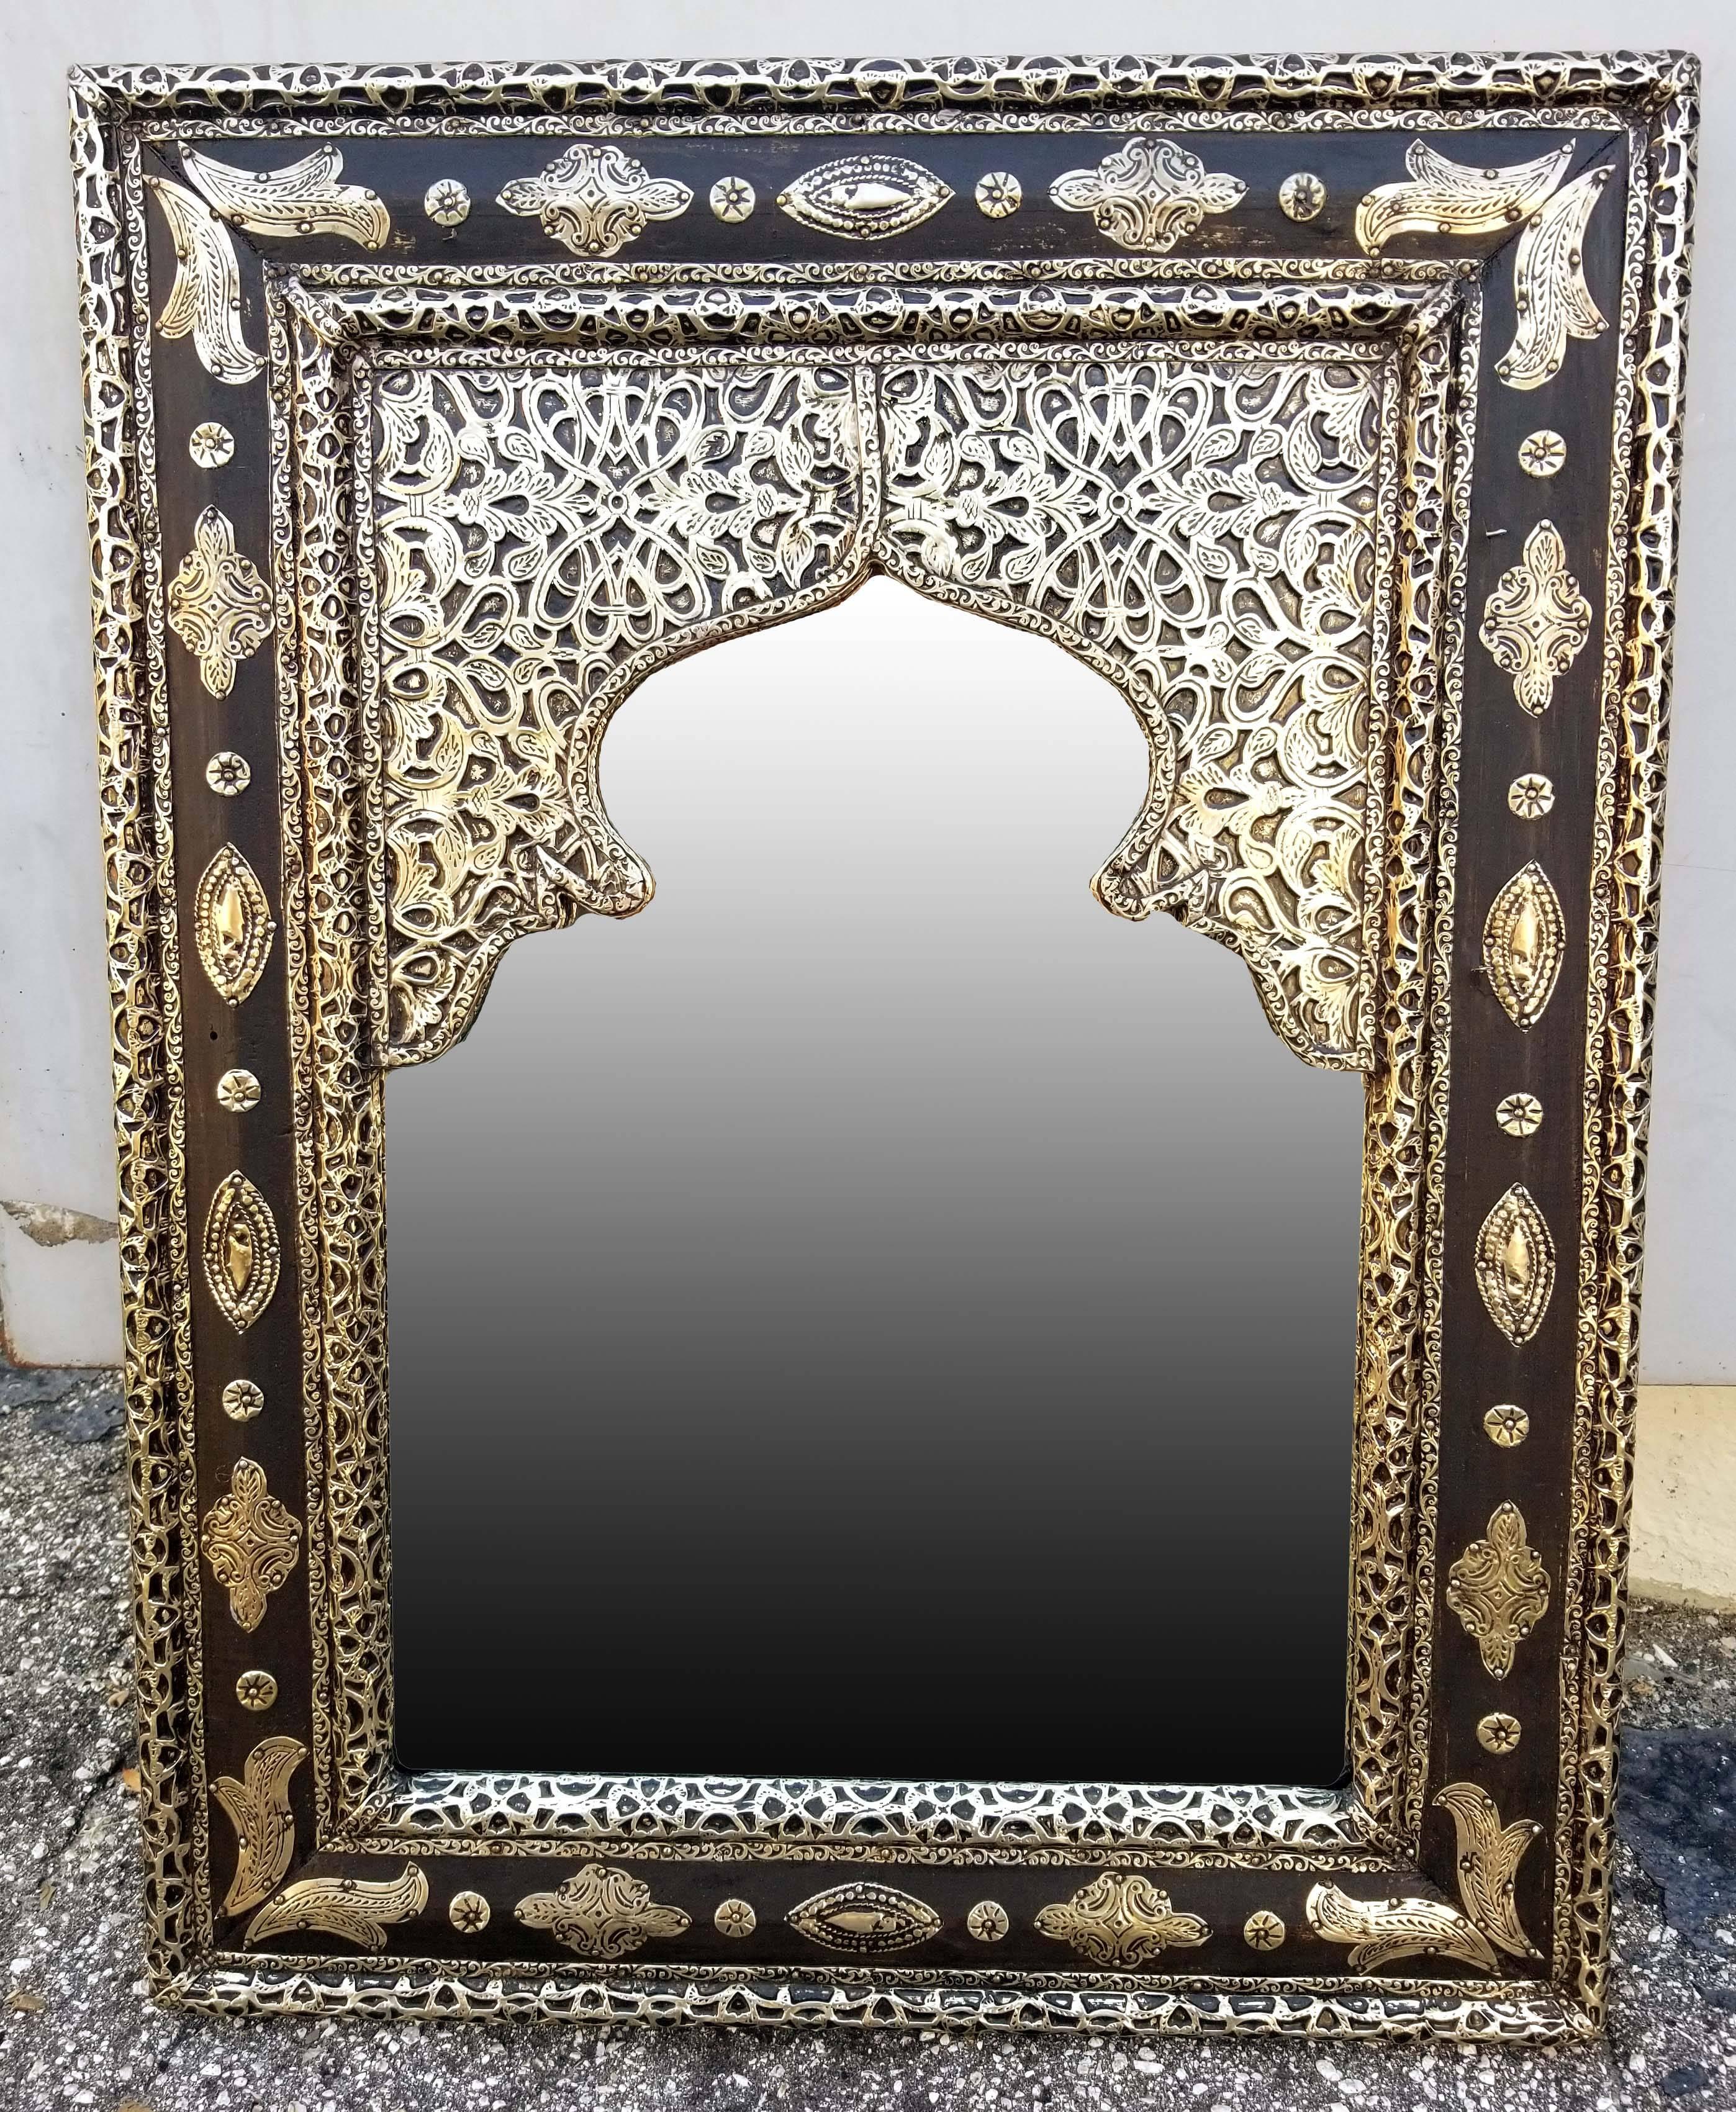 Large metal inlaid and camel bone Moroccan mirror. Made in the city of Marrakech. Rectangular shape measuring approximately 26